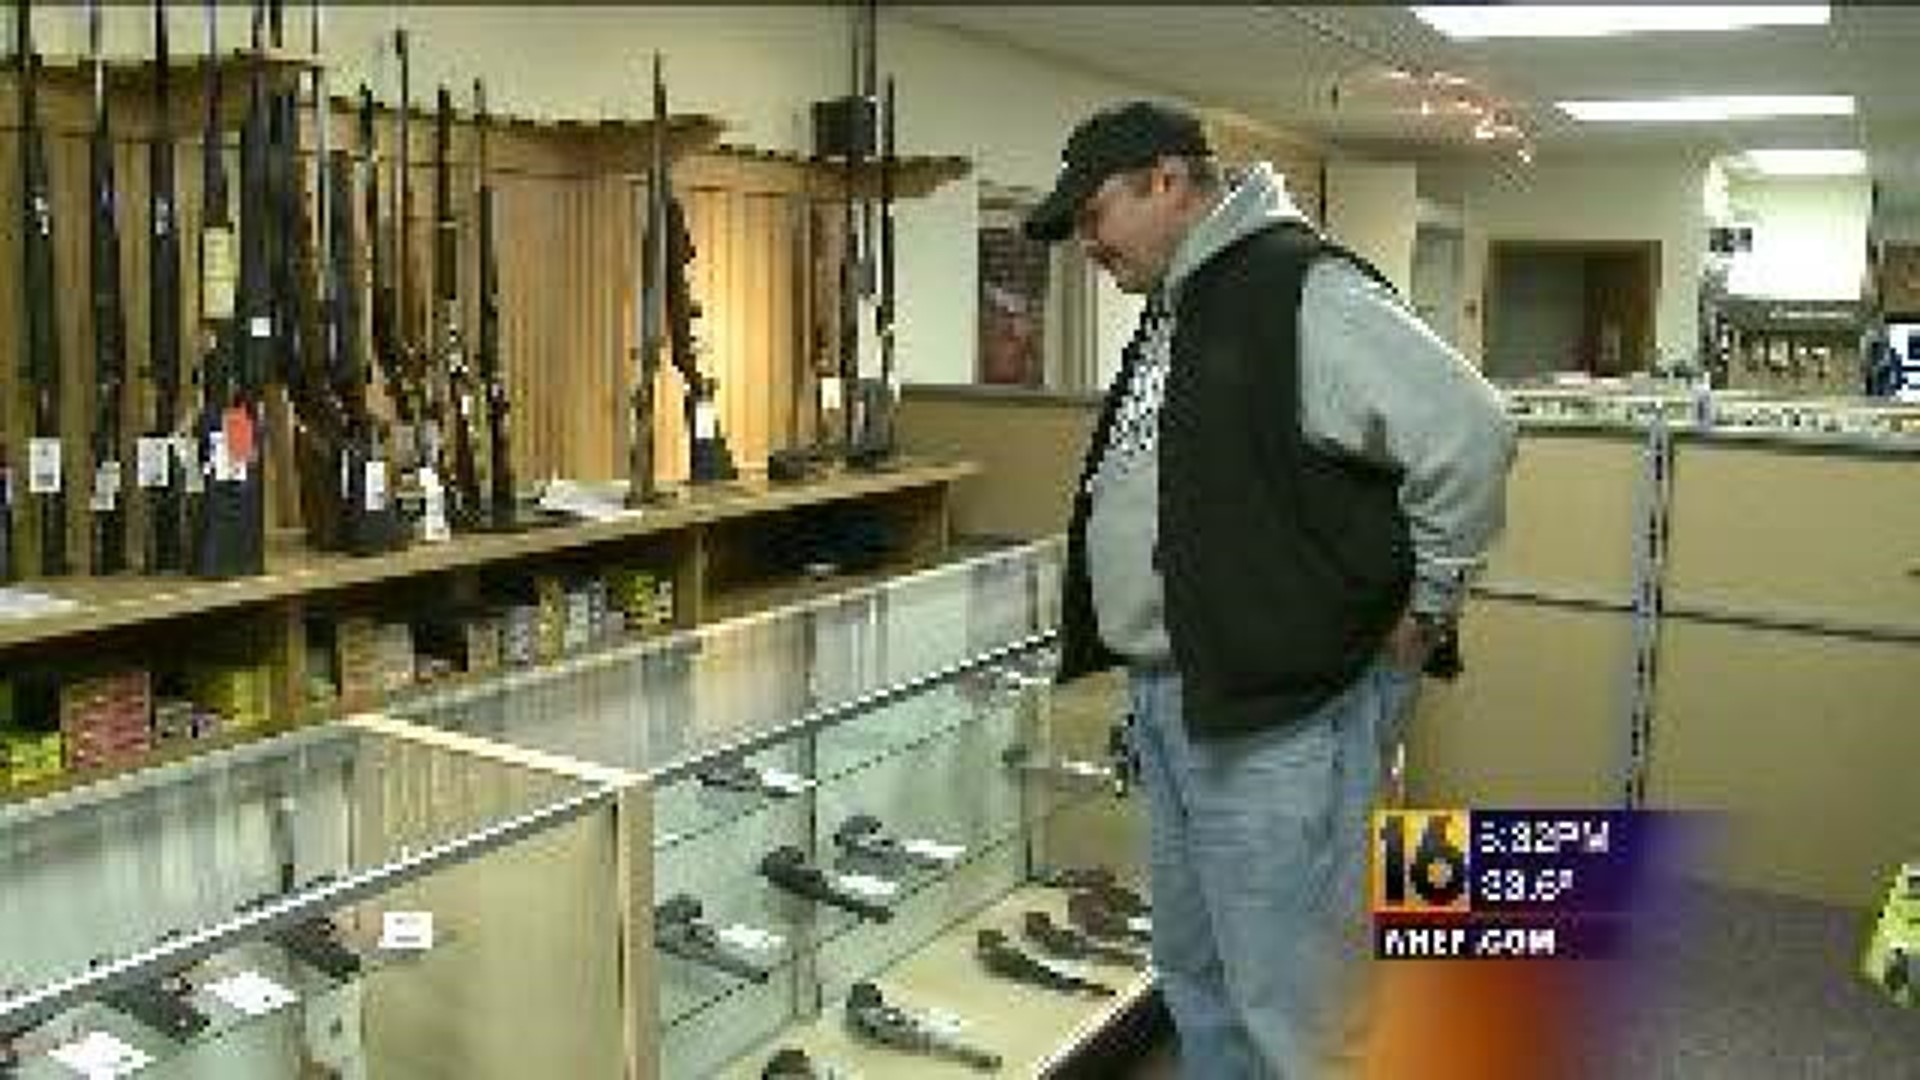 Gun Owners Anxiously Wait for Obama Announcement